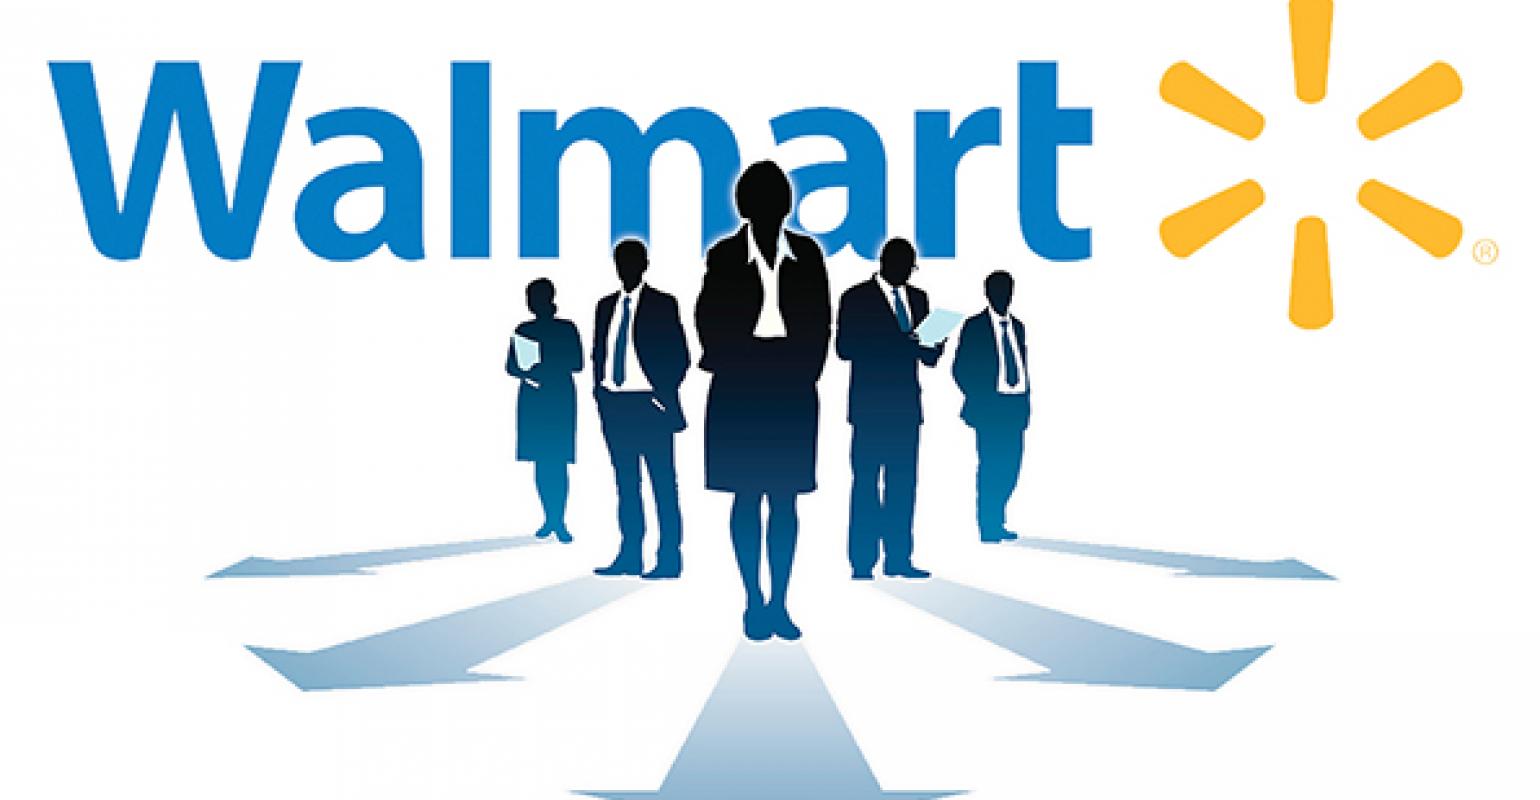 Walmart names new division leaders in operations restructuring